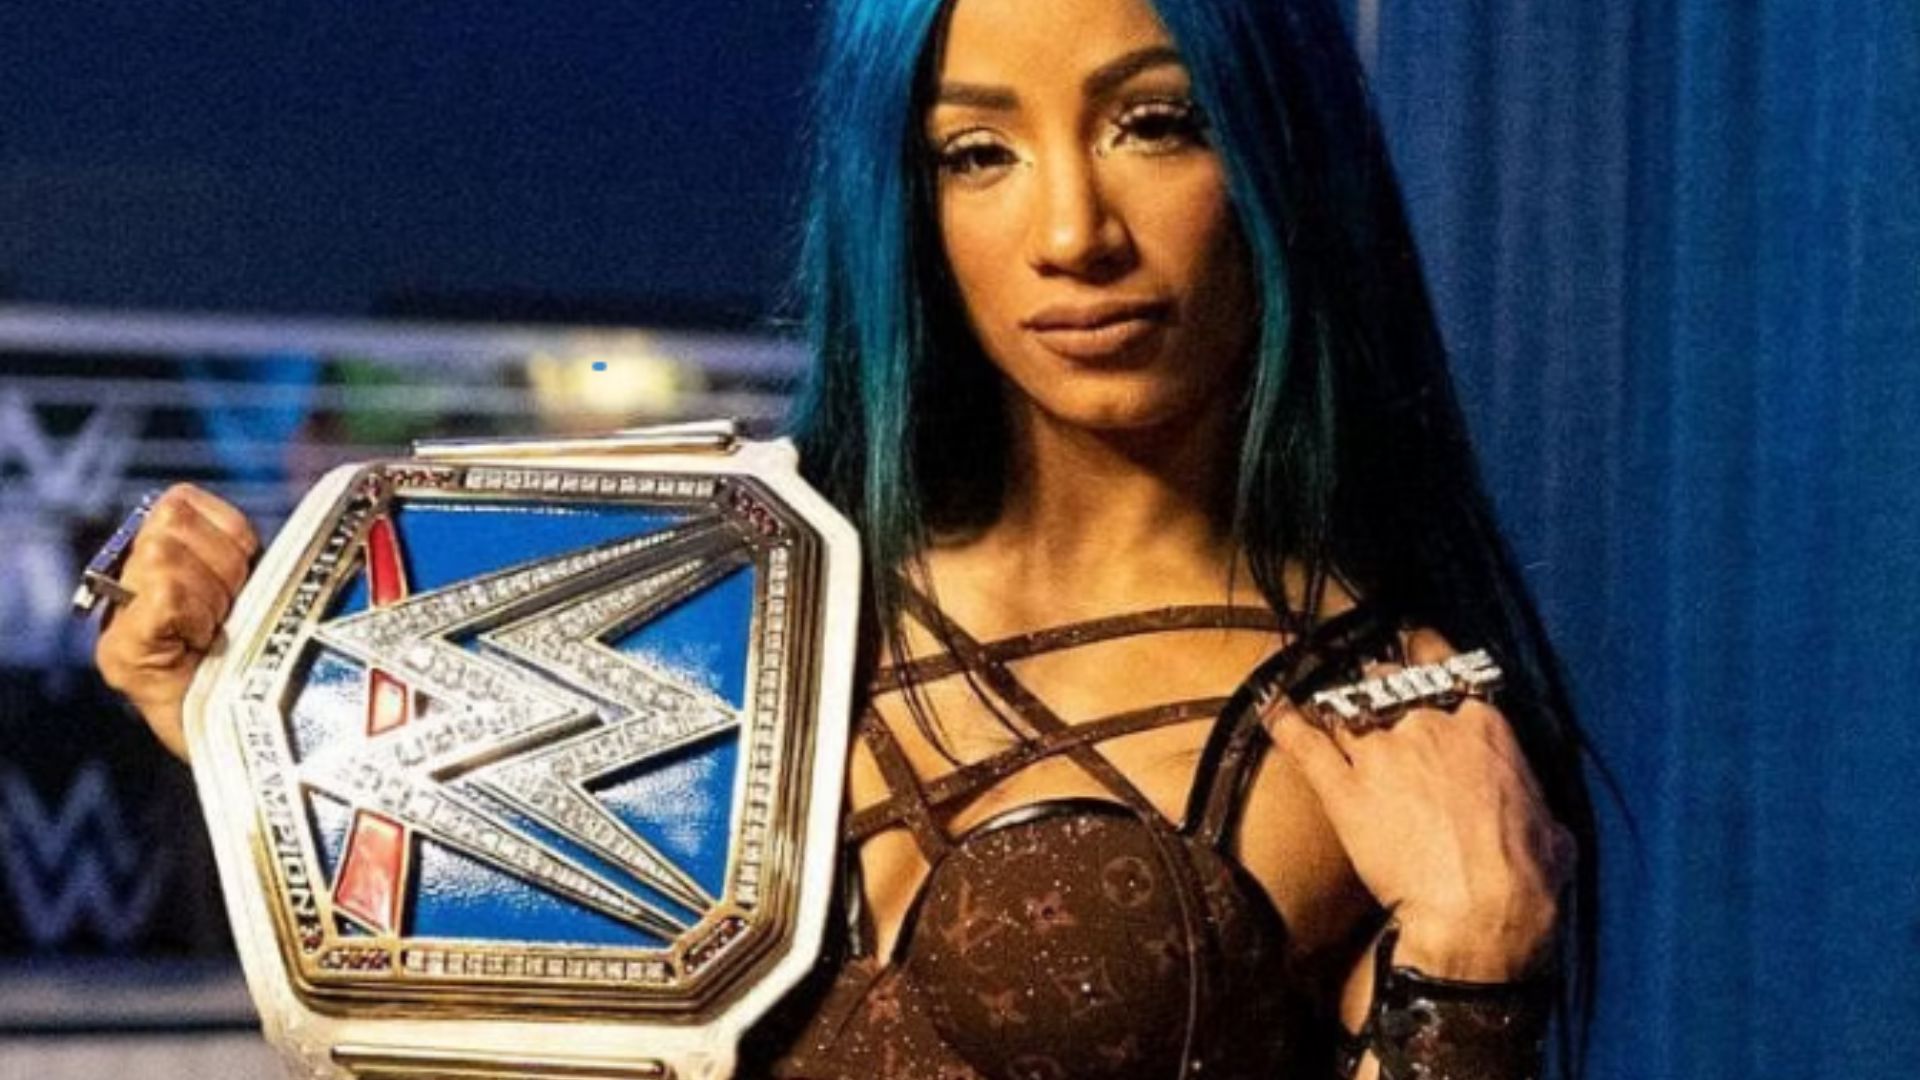 Wrestling veteran on Sasha Banks being paid short of what others in WWE